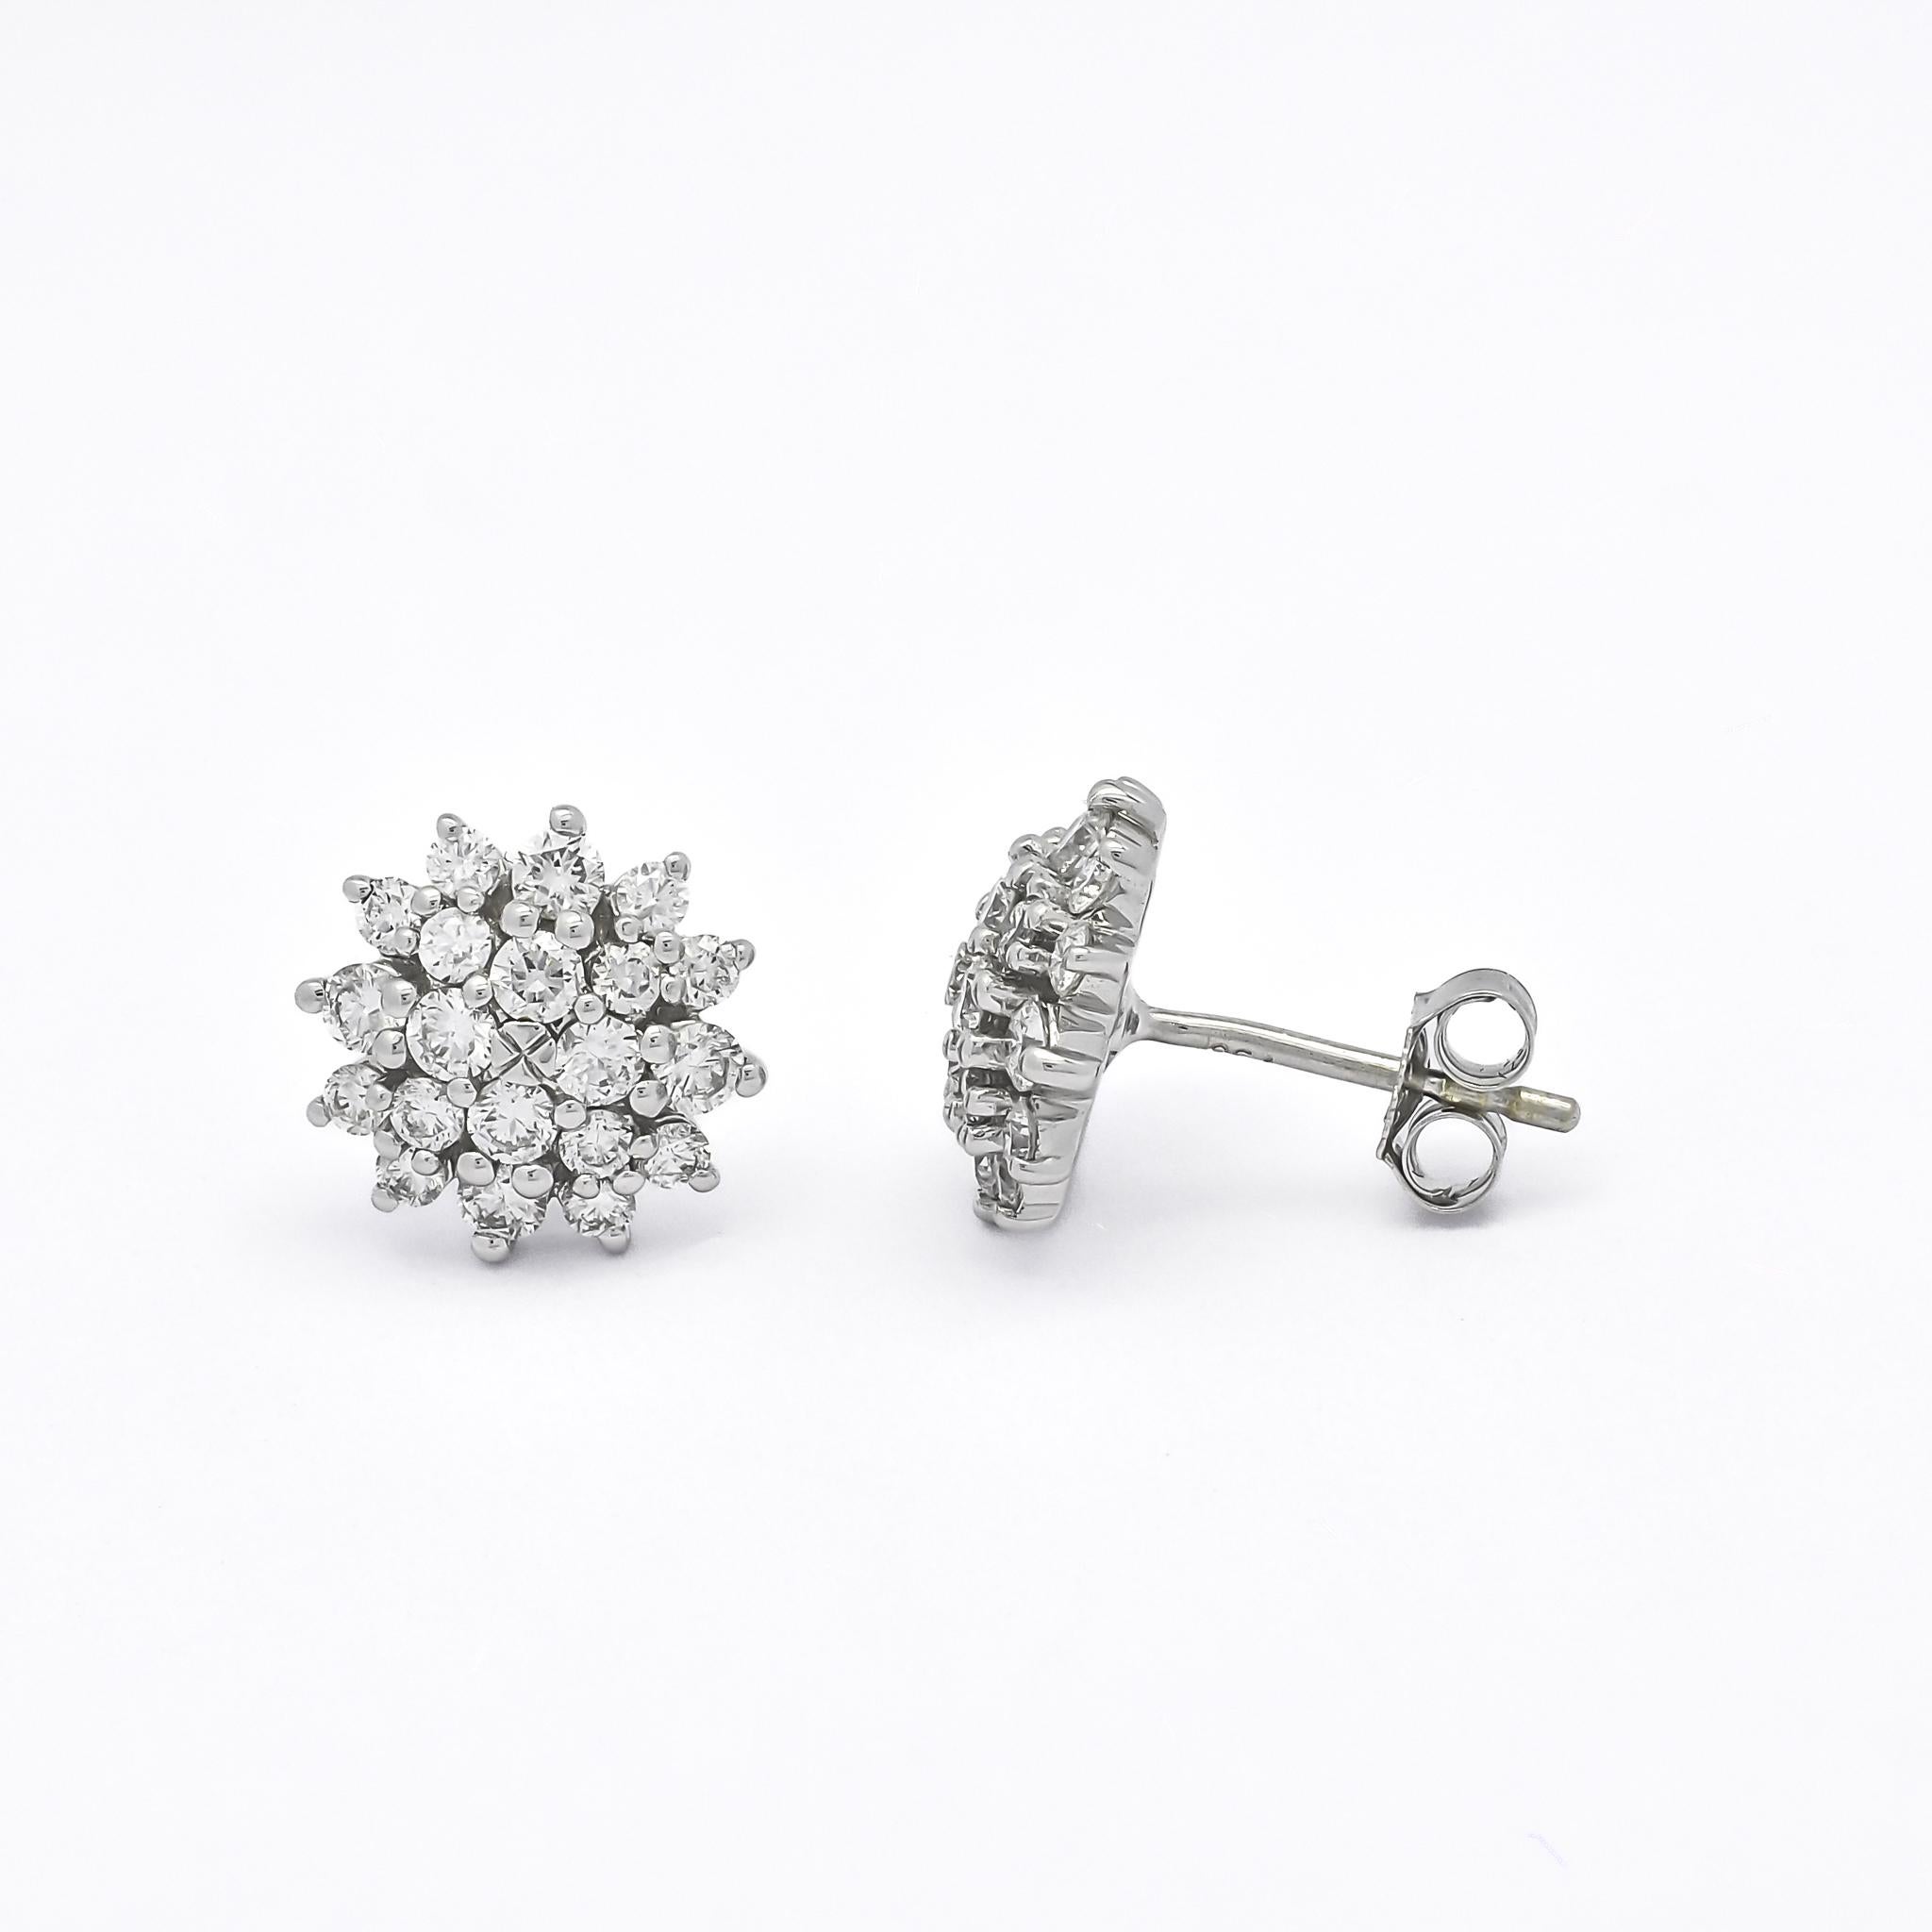 Introducing our stunning Diamonds Flower Shape Cluster Setting Studs, a perfect combination of simplicity and elegance. These Natural Diamond Earrings in 18KT White Gold feature a cluster of diamonds in a captivating flower shape setting, creating a